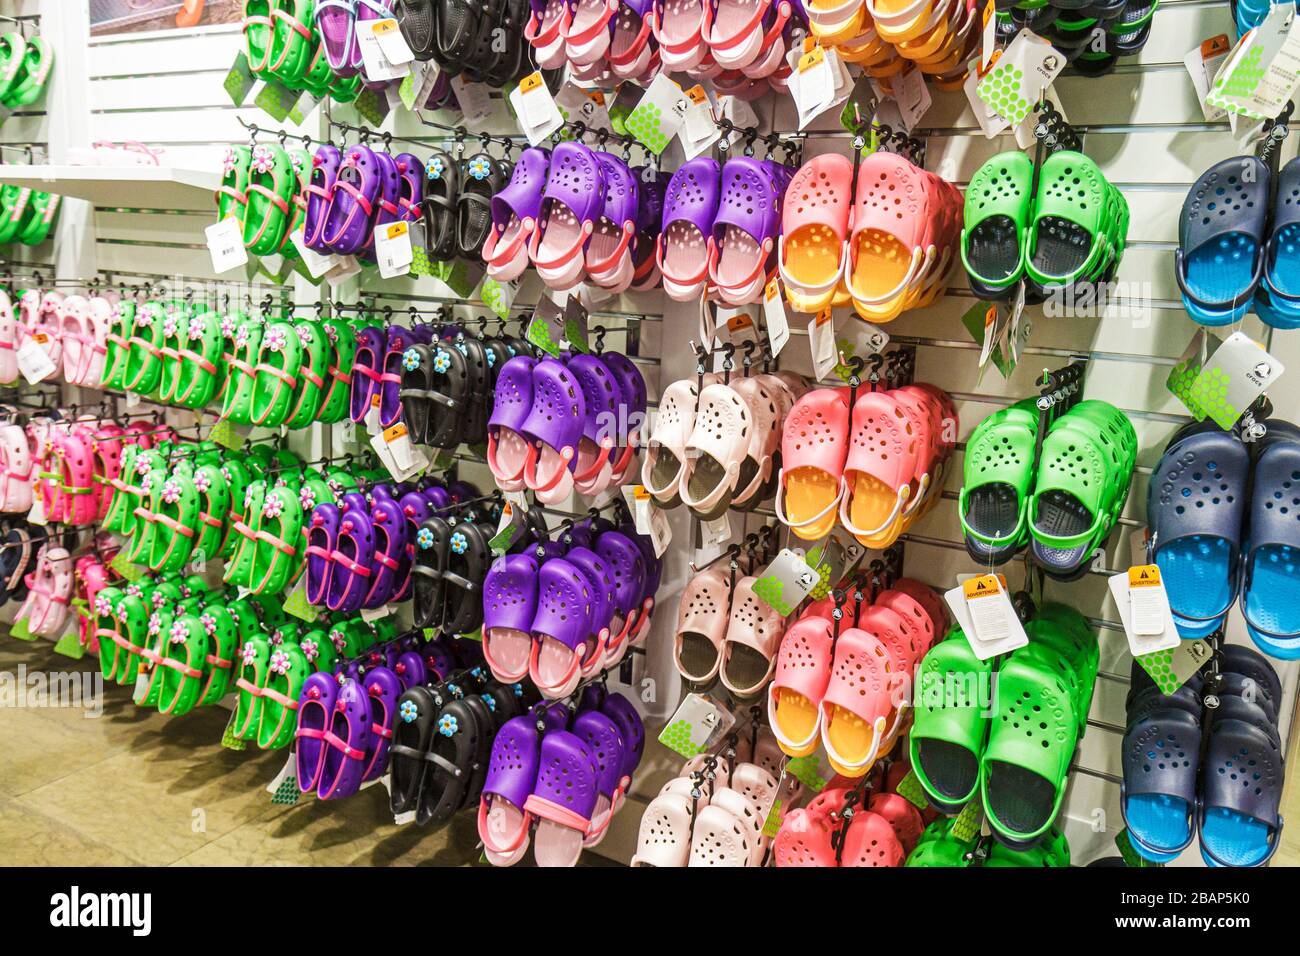 Miami Florida,Aventura mall,display case sale,Crocs,shoes,footwear,luxury,store,stores,businesses,district,FL110825096  Stock Photo - Alamy